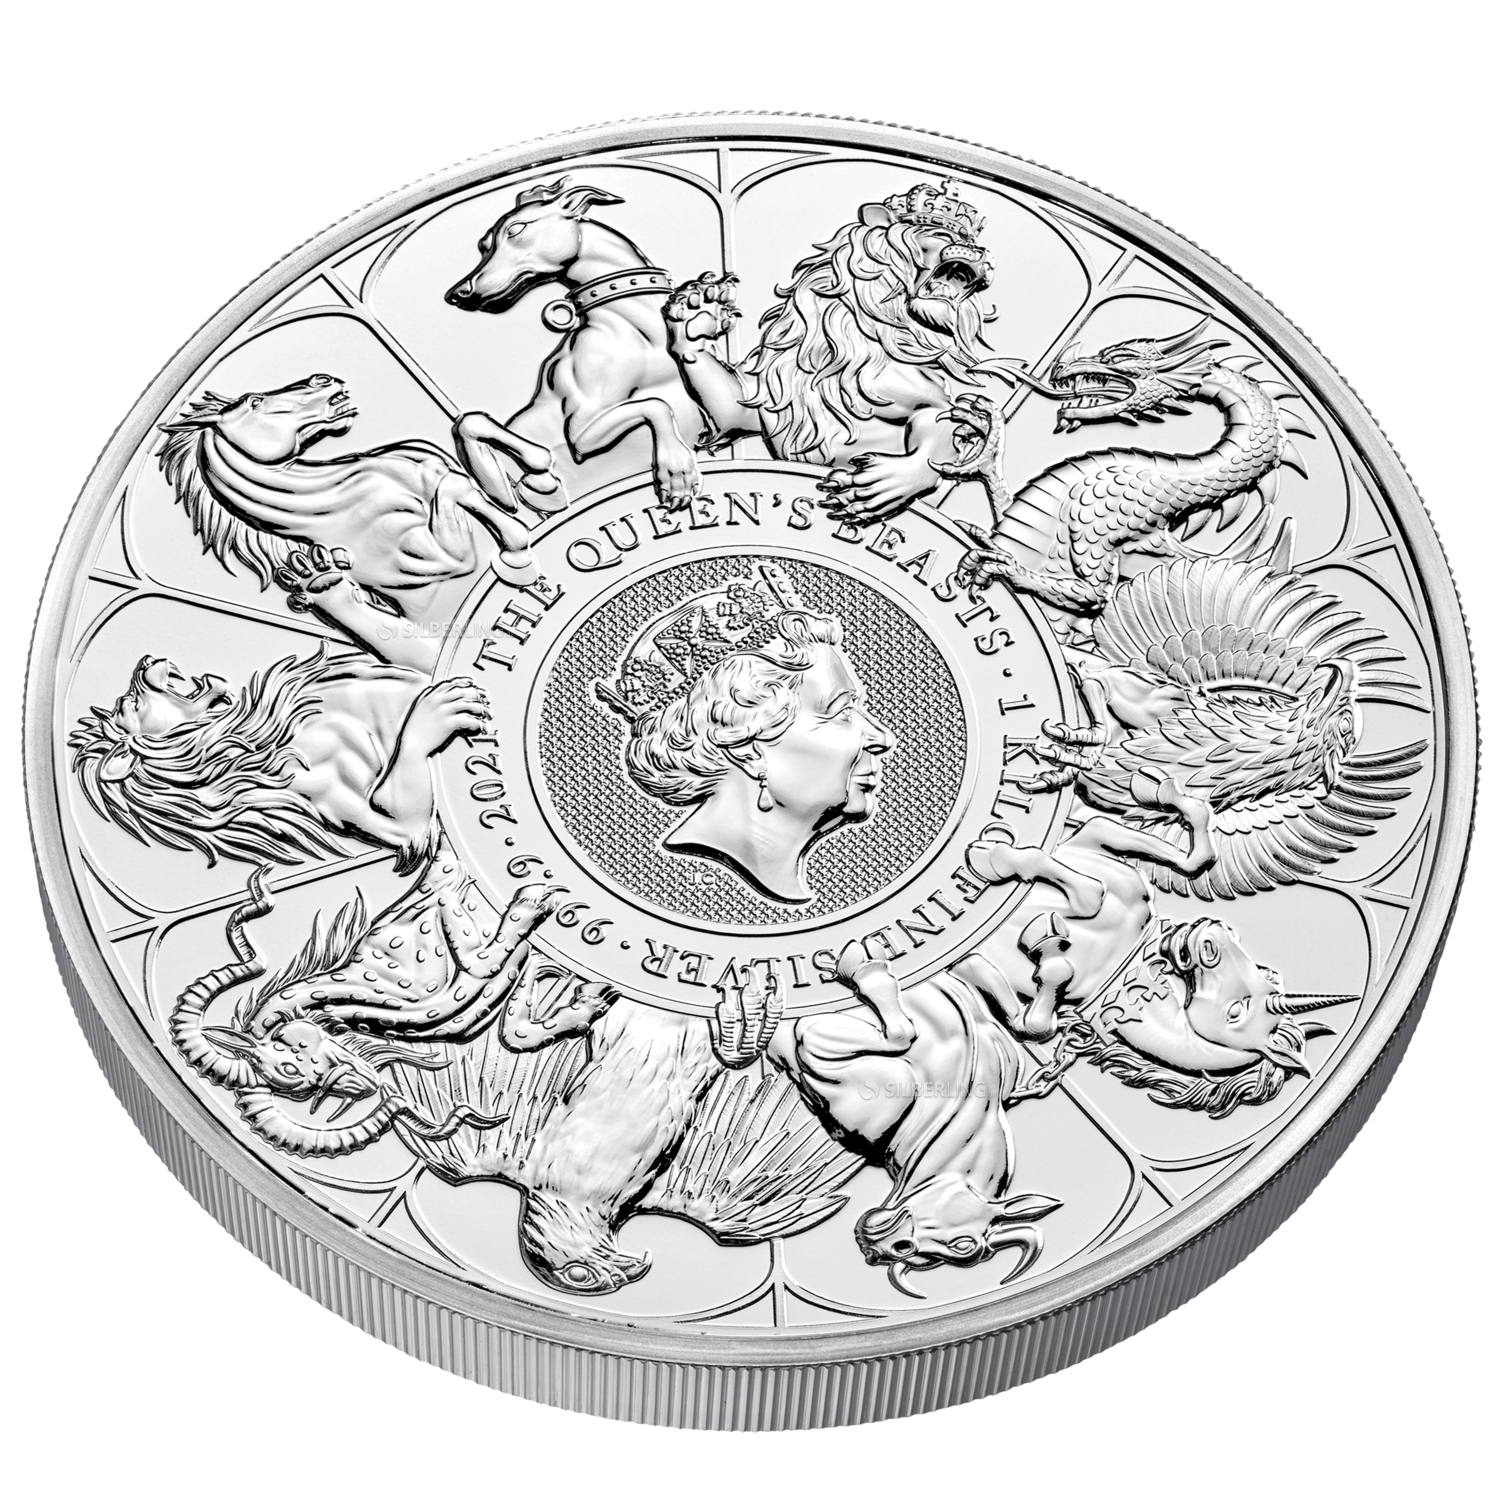 Queen's Beasts Completer Coin 1 Kg Silber 2021